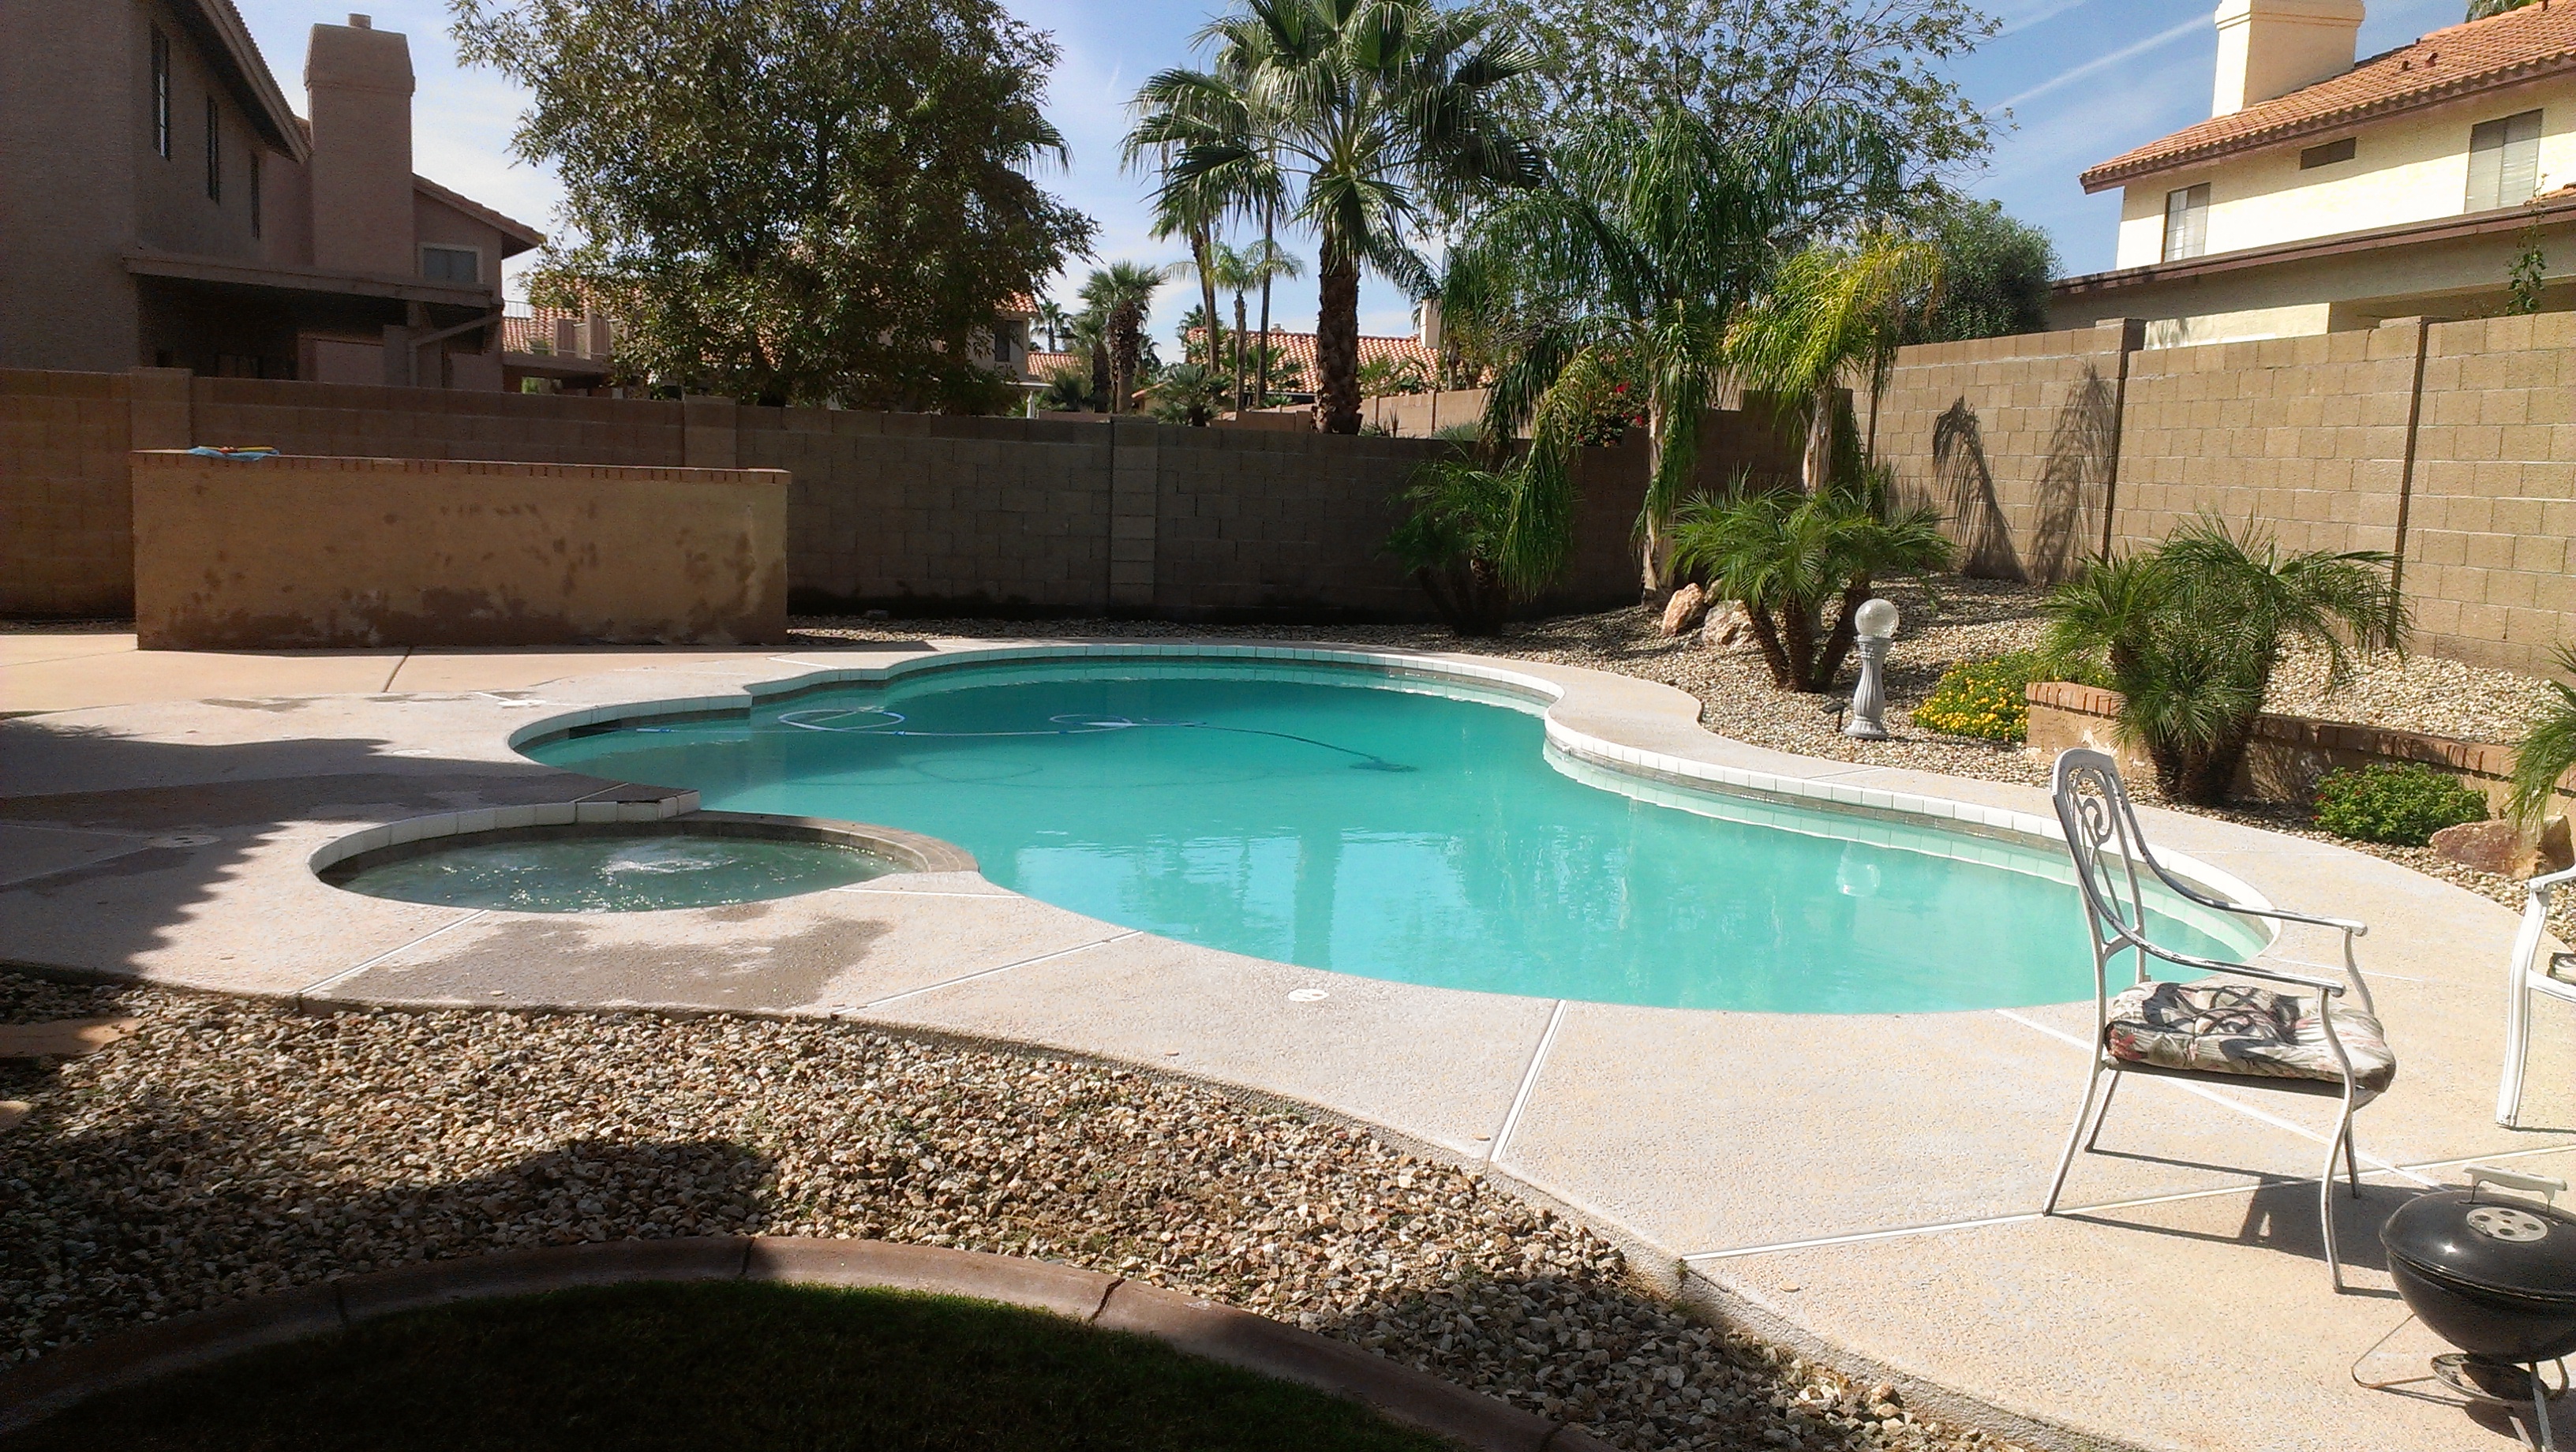 backyard with pool landscaping ideas photo - 2